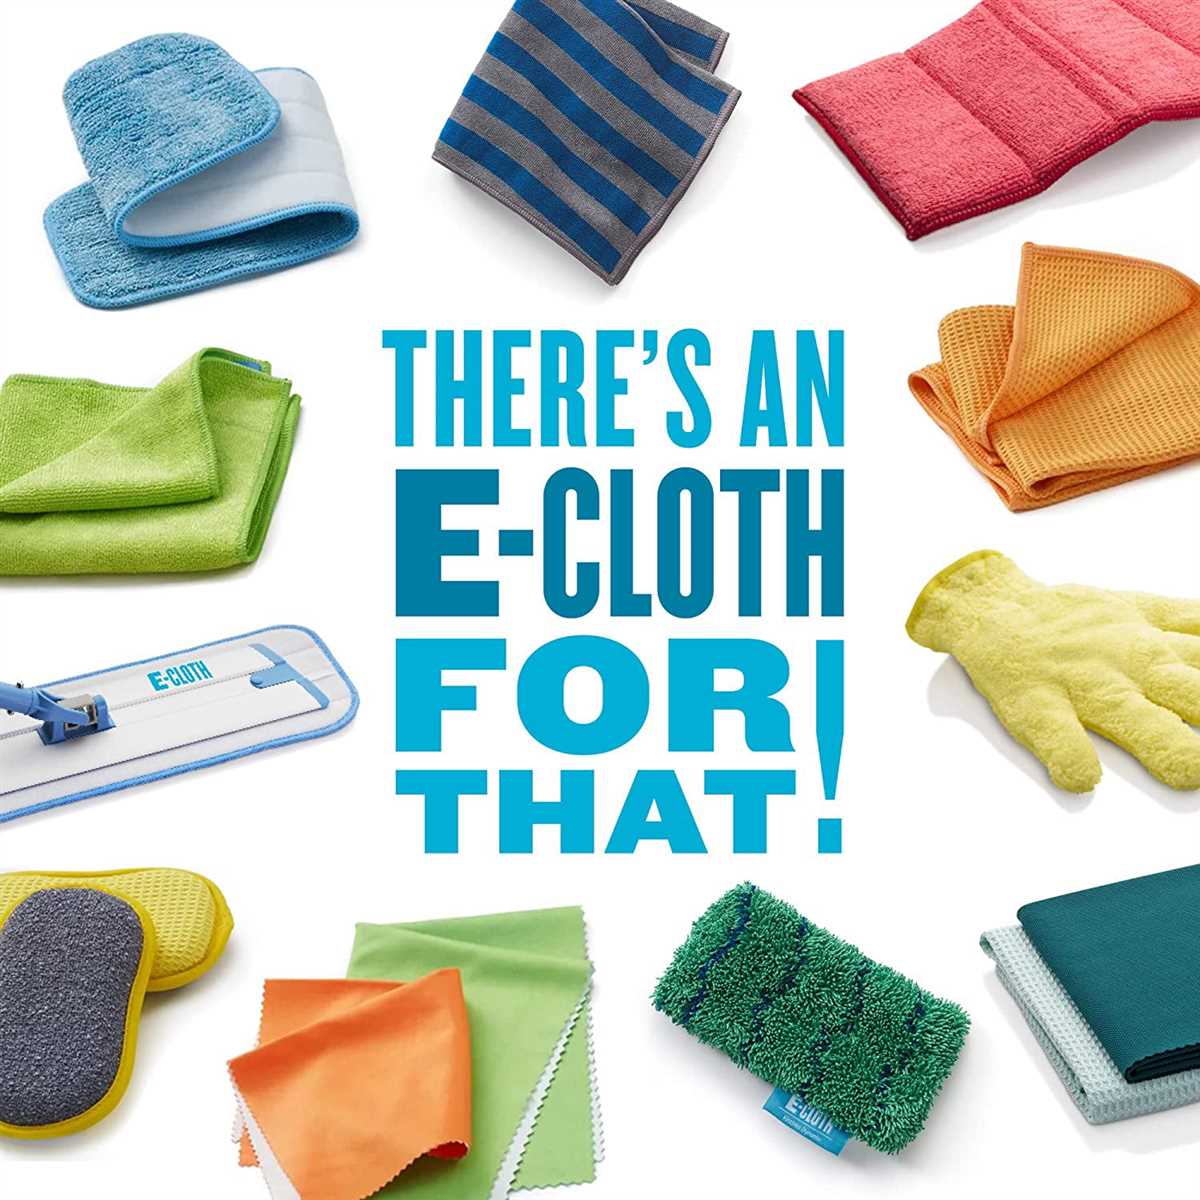 The Benefits of Using E-Cloths